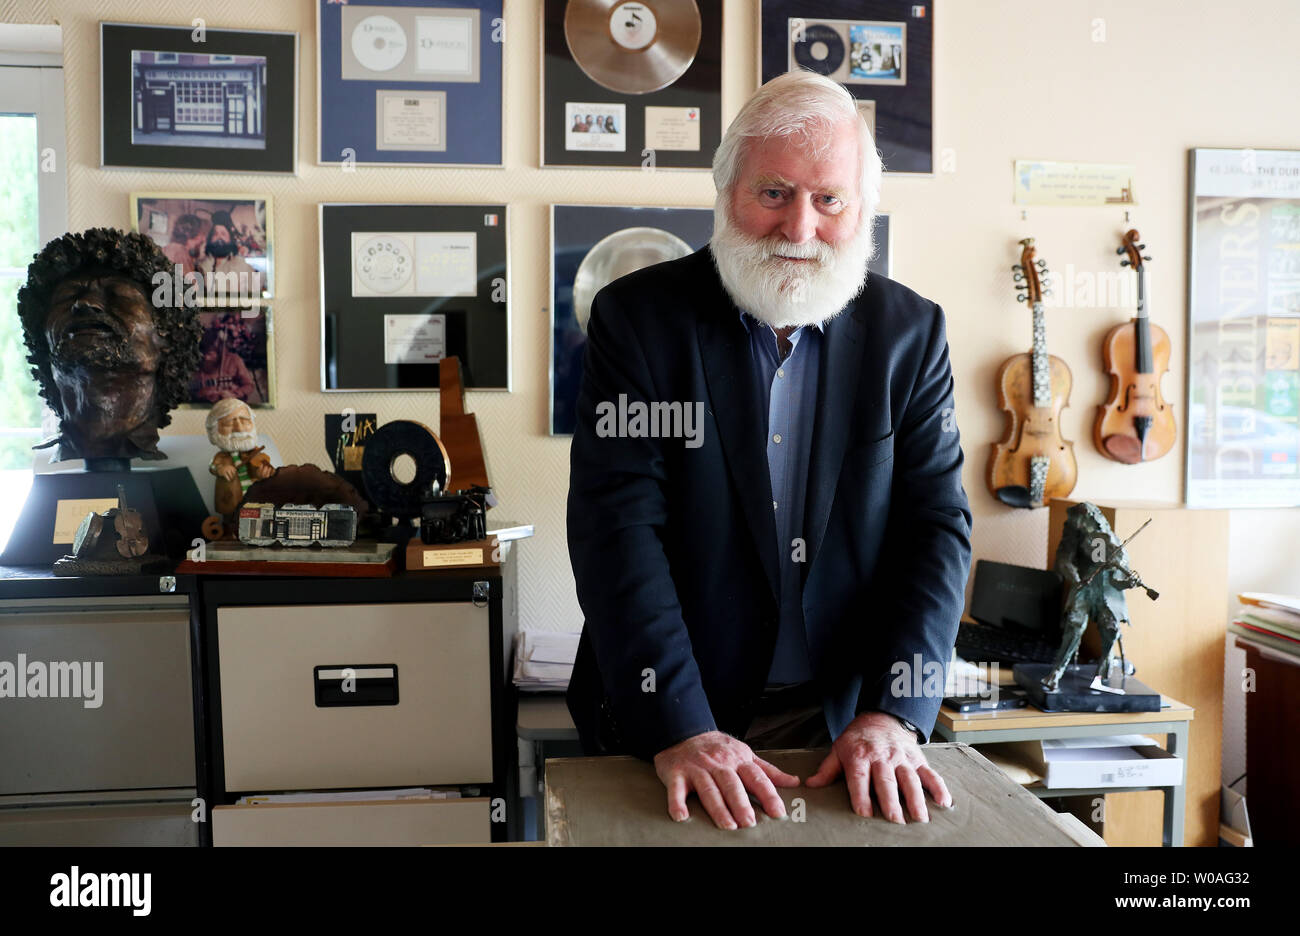 The Dubliners' John Sheahan at the moulding ceremony of his hands which will be unveiled in bronze on the Cong Hands of Fame Award wall in Mayo this September. Stock Photo